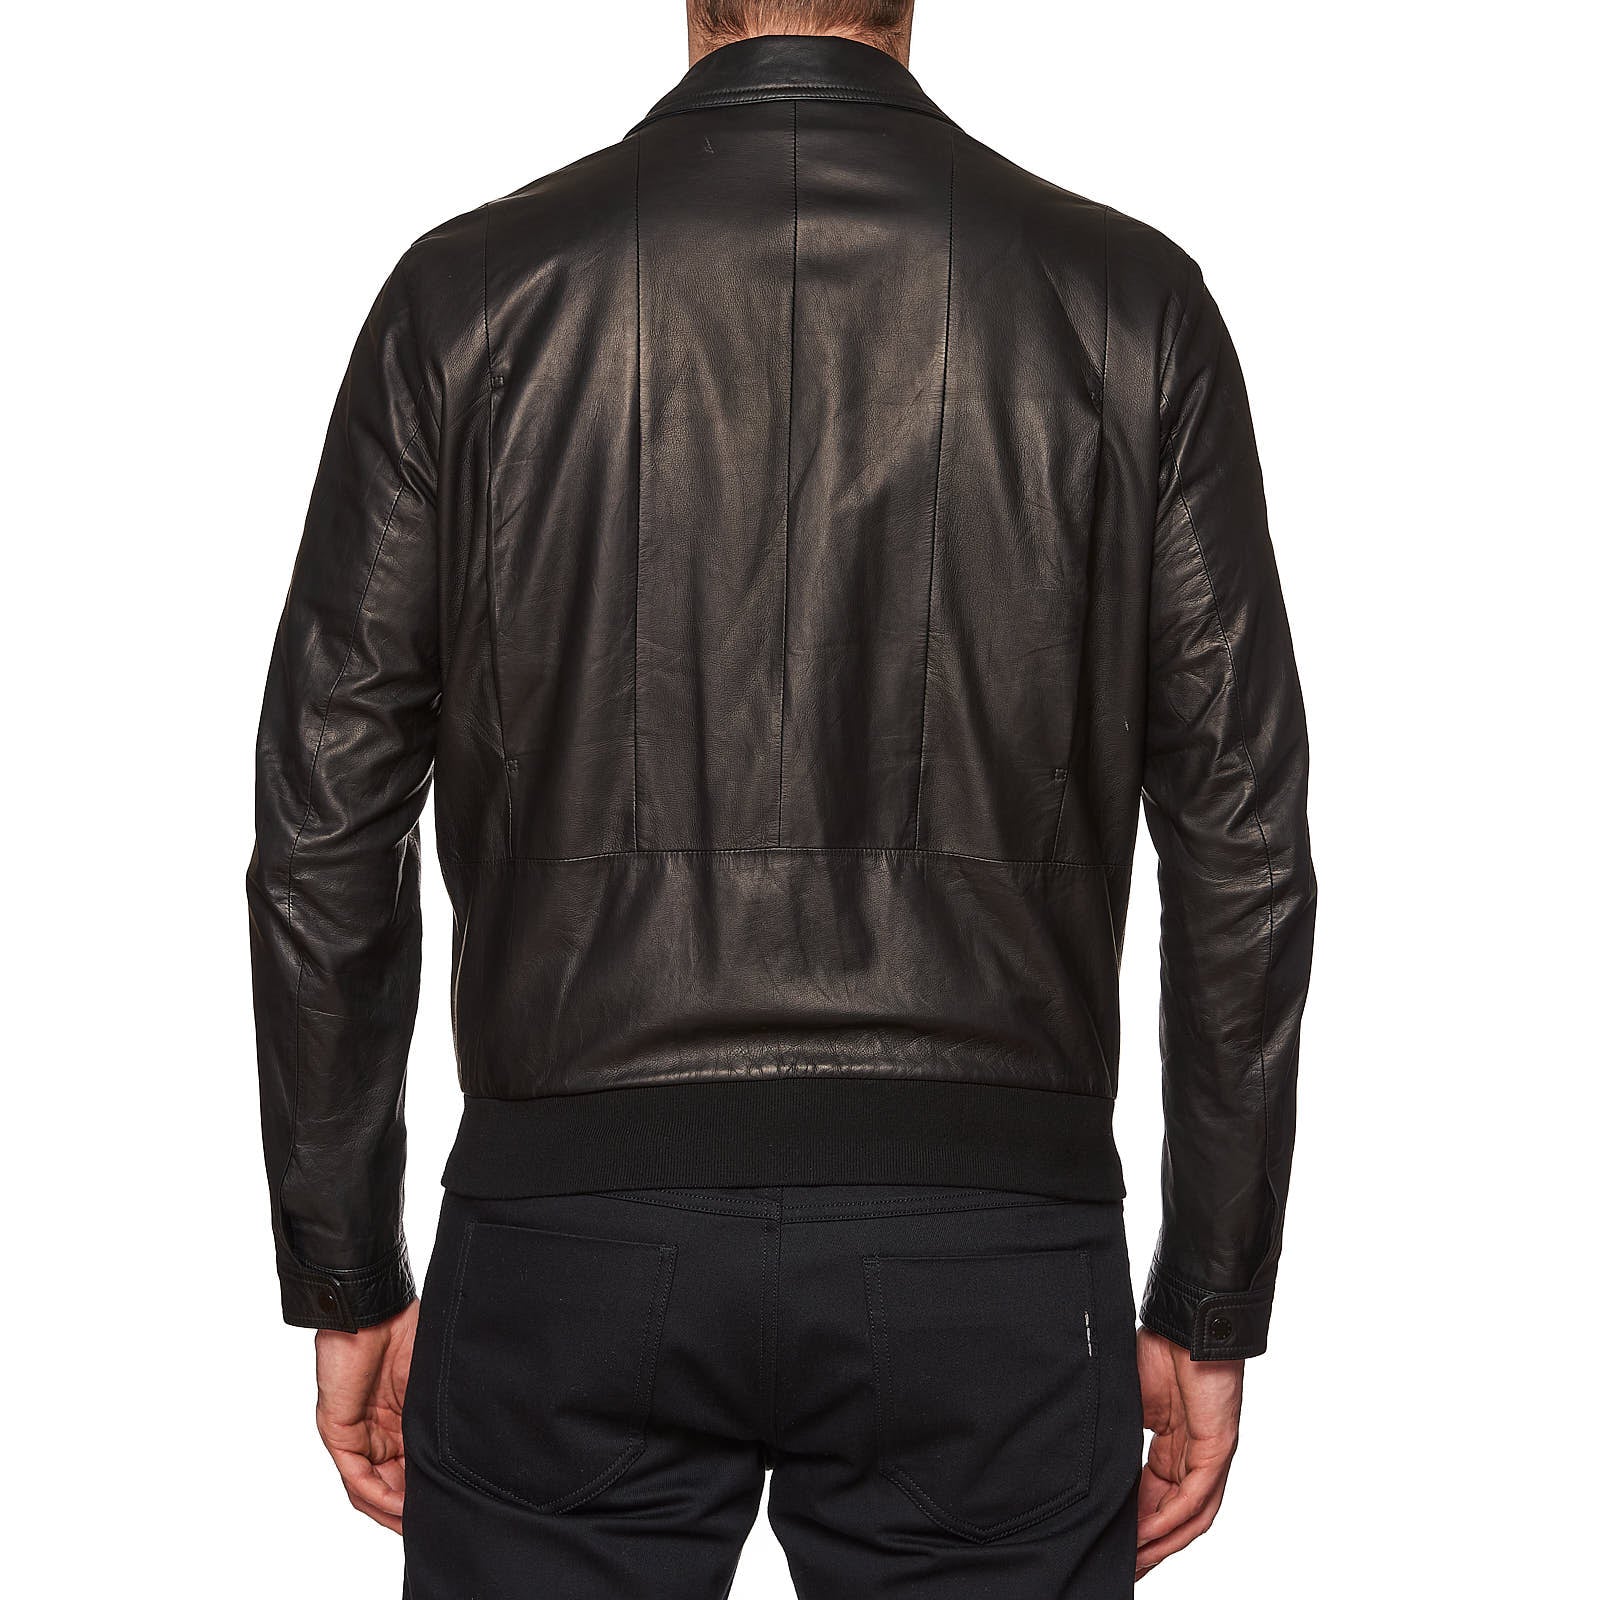 SERAPHIN Black Lamb Leather Fully Lined Bomber Jacket FR 50 US M SERAPHIN